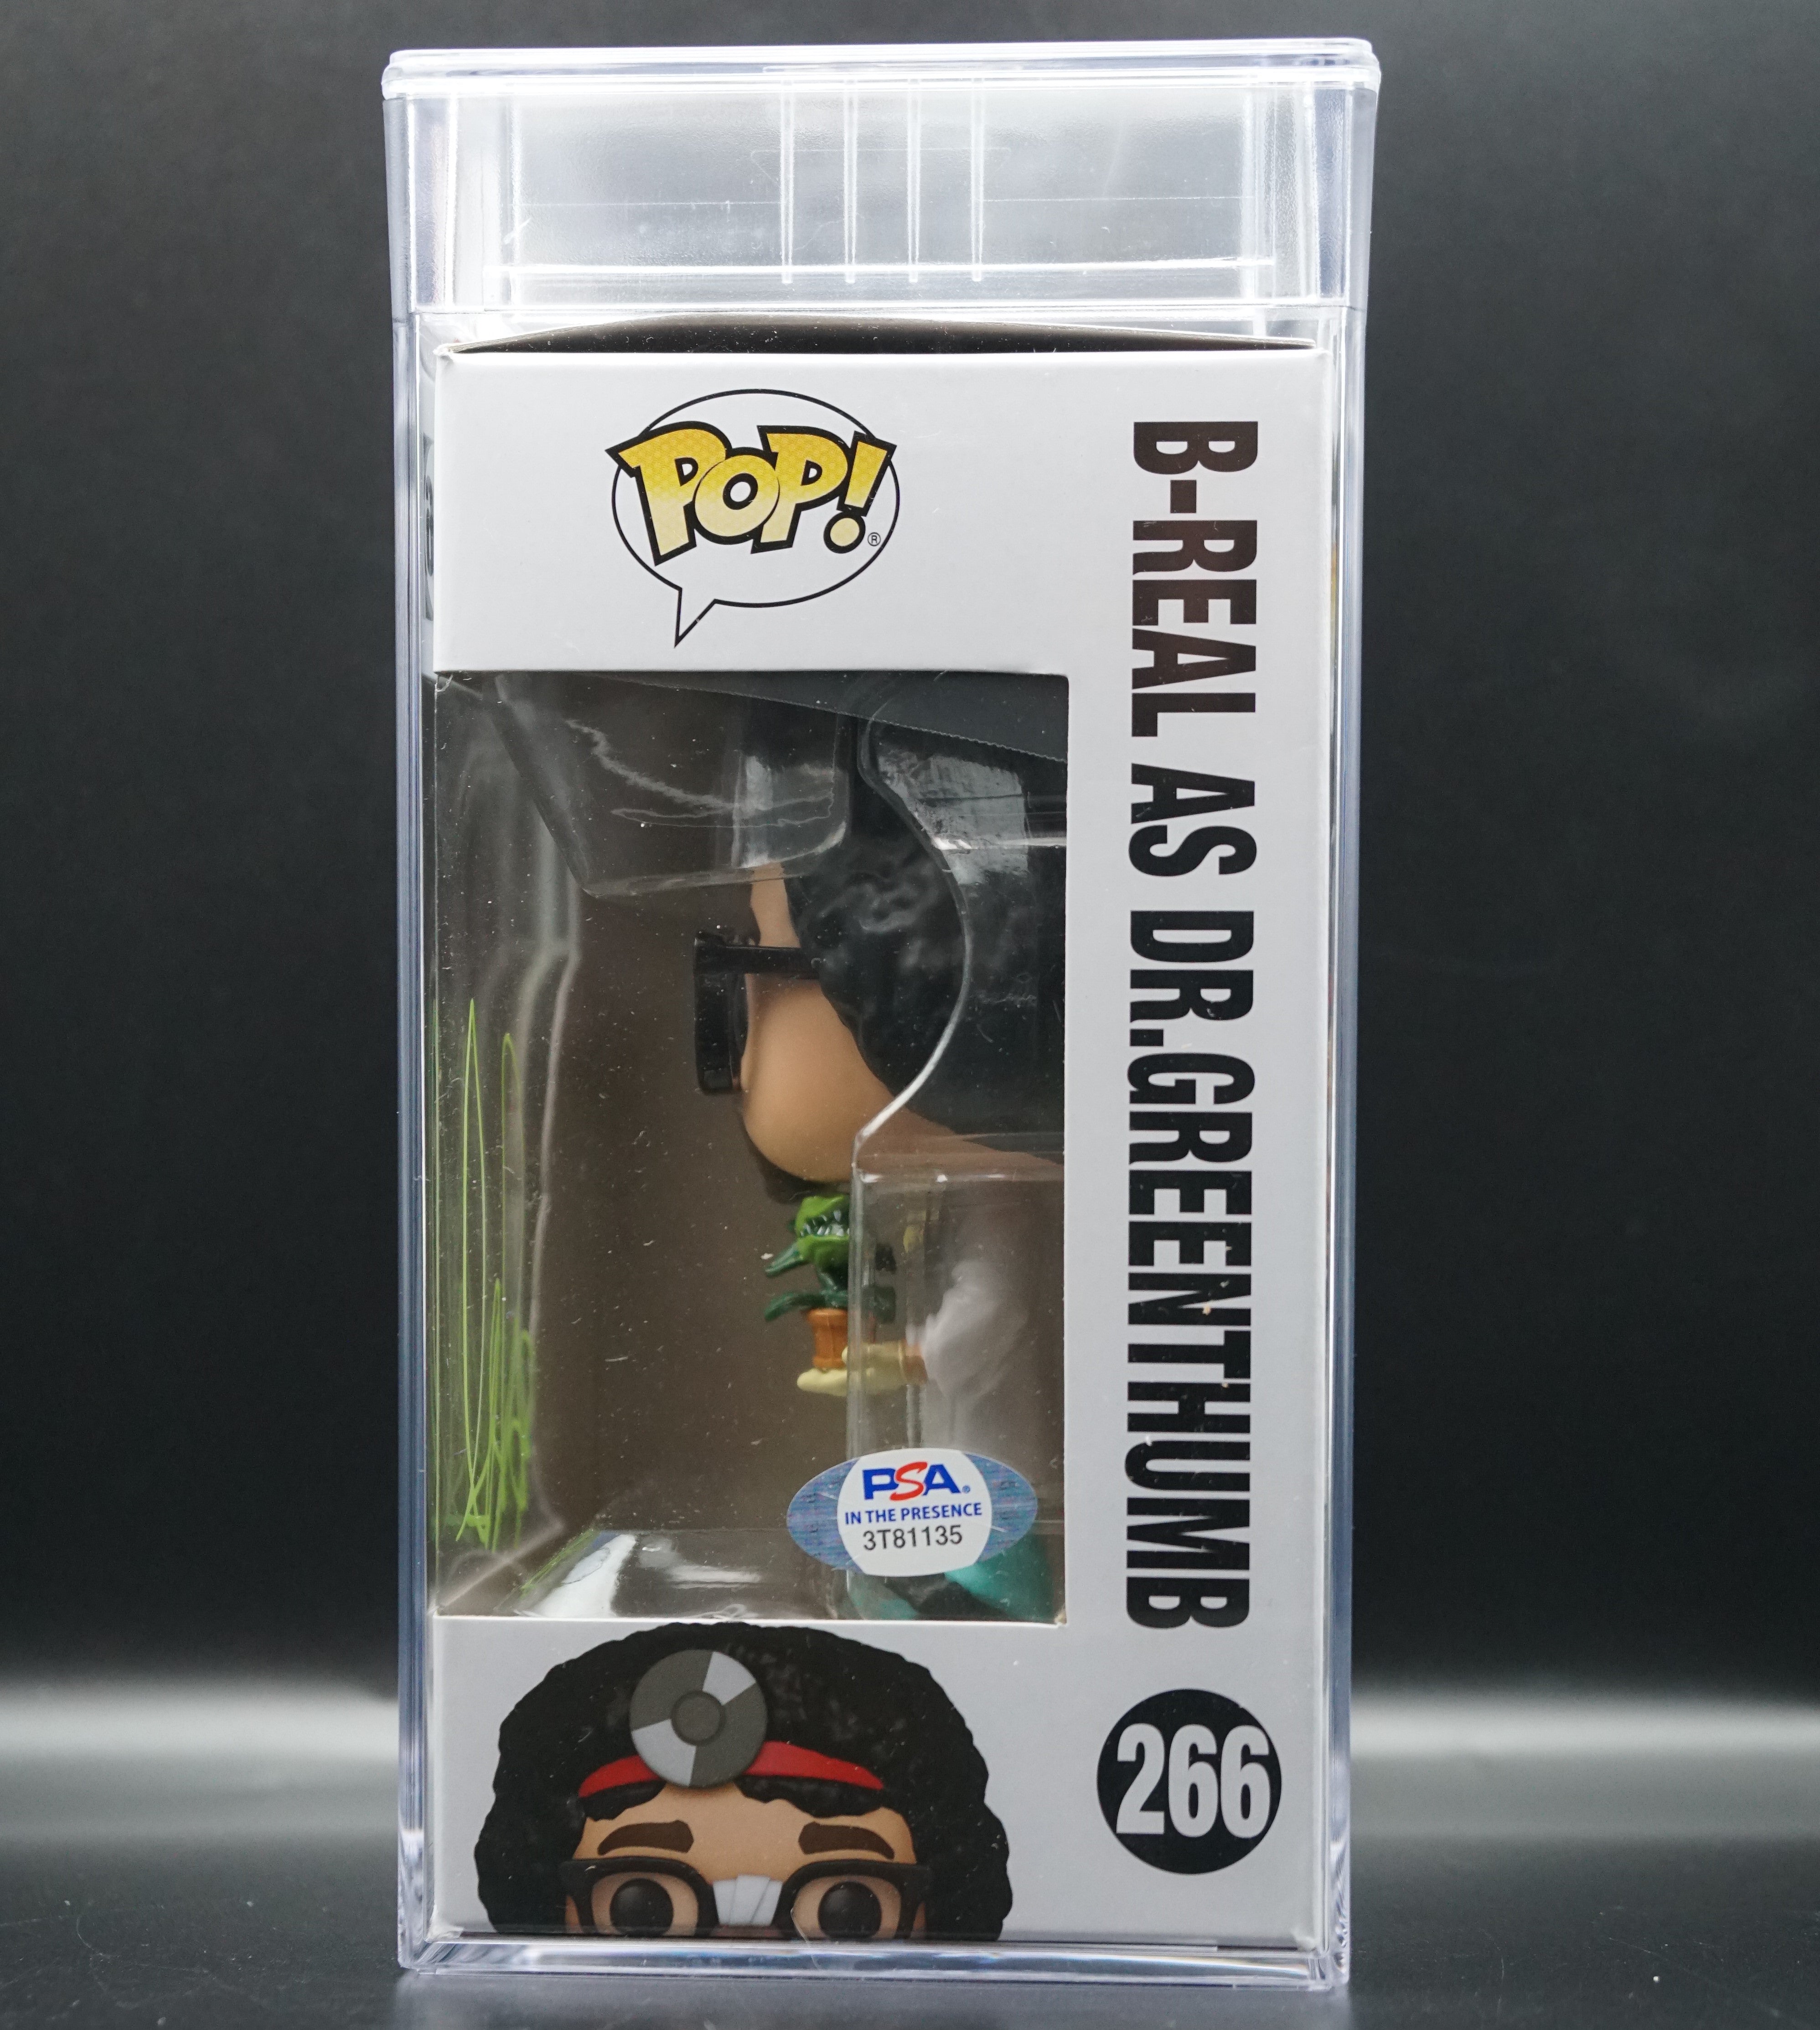 Cypress Hill Funko Pop #266 Encapsulated B-Real as Dr. Green Thumb from Music Group PSA COA - Signed by B-Real